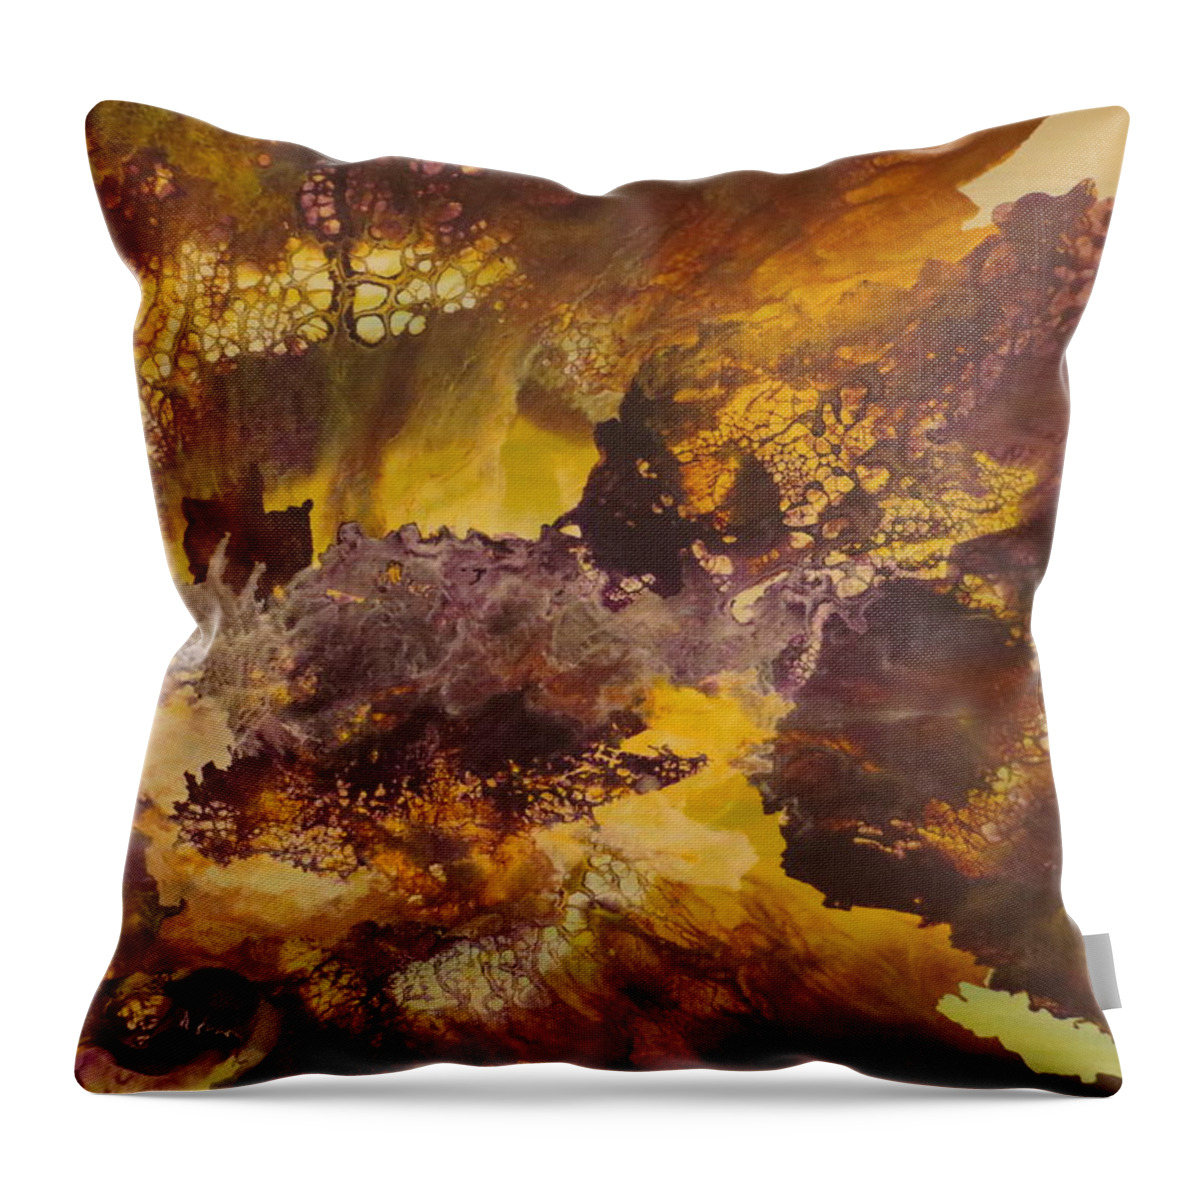 Abstract Throw Pillow featuring the painting Mystical by Soraya Silvestri